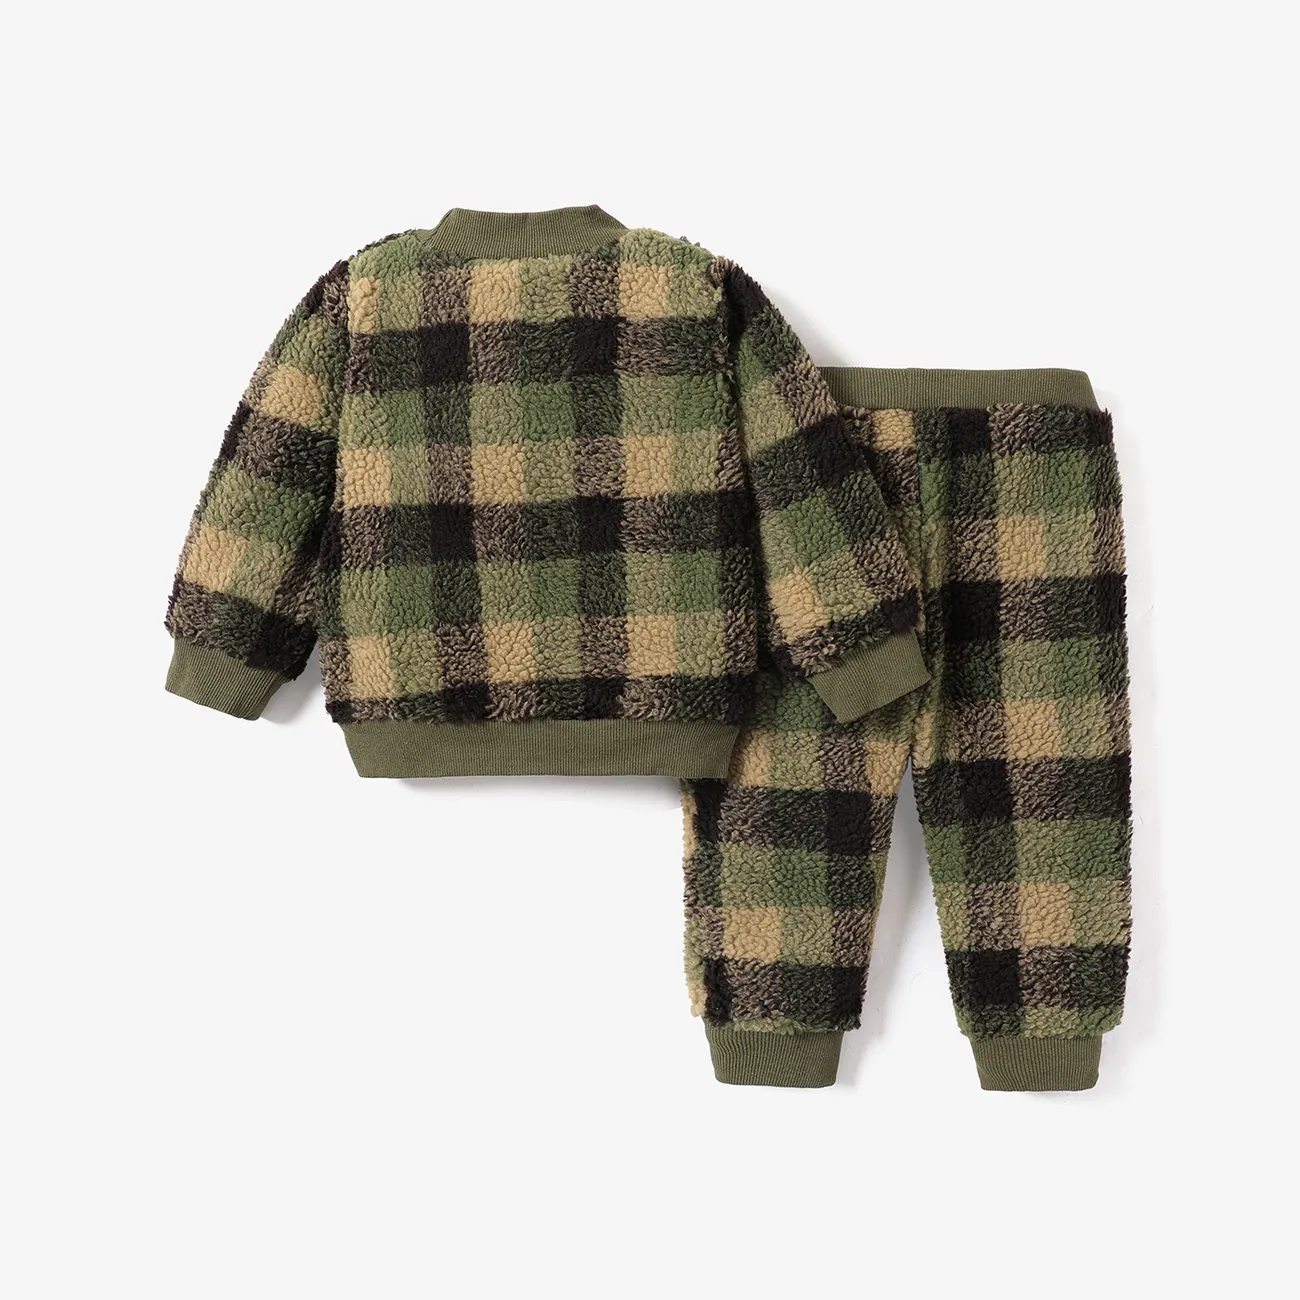 2-piece Toddler Boy Plaid Fuzzy Pullover Sweatshirt and Pants Set Army green big image 1